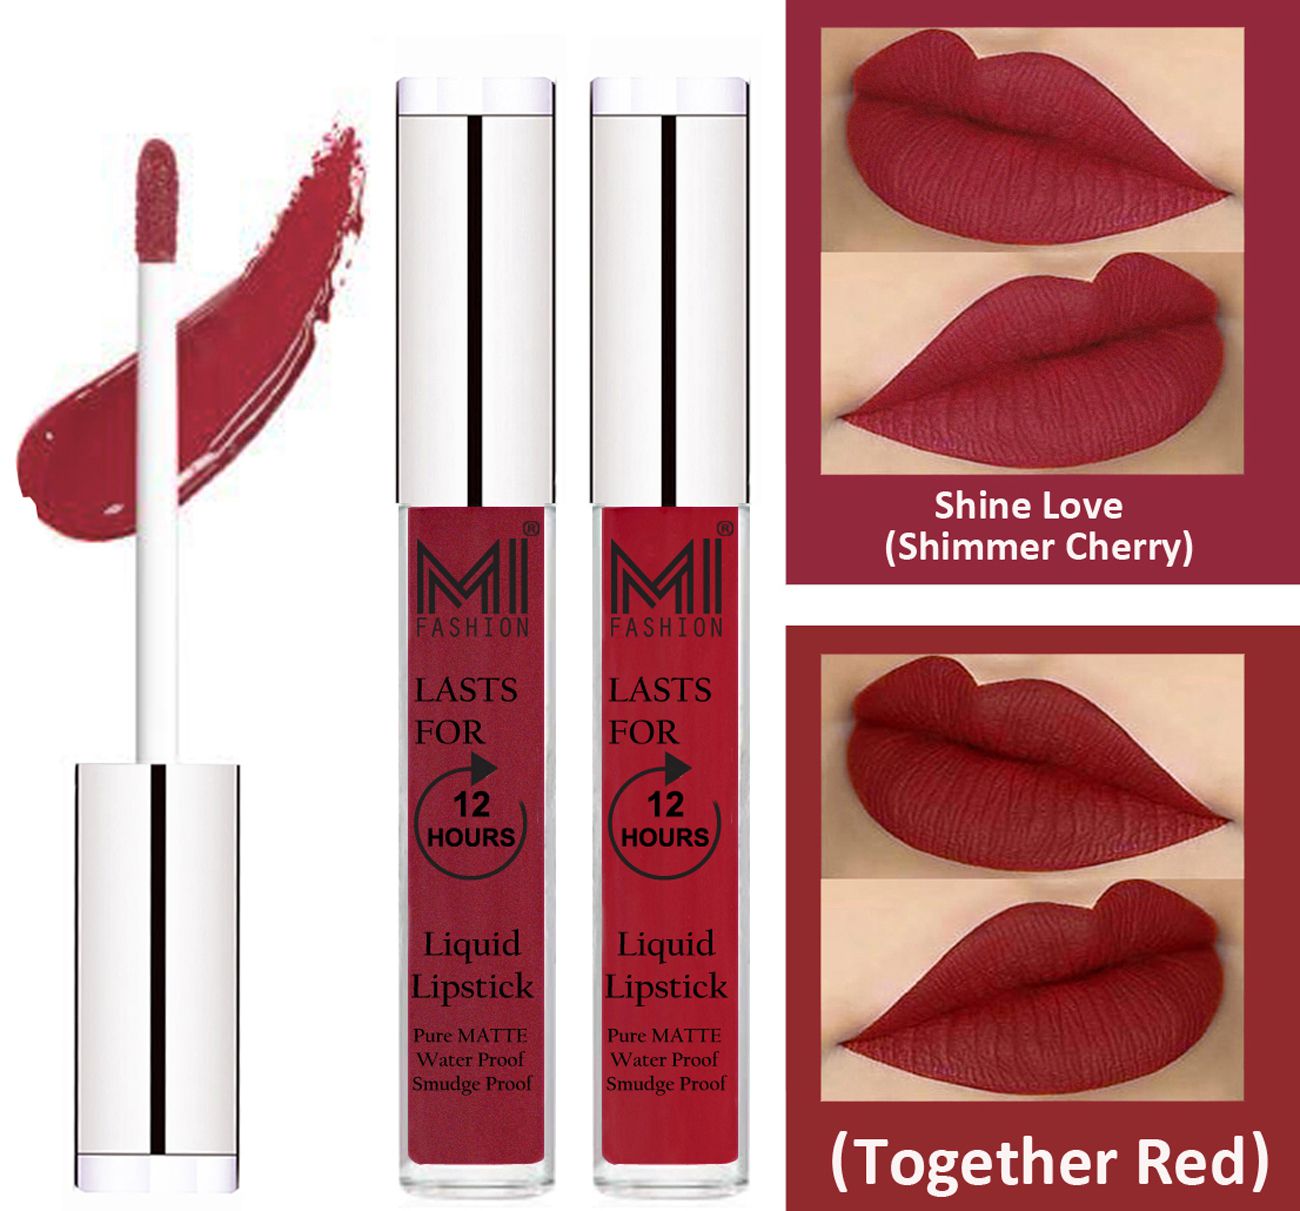     			MI FASHION Liquid Lipstick Shimmer Cherry ,Together Red Pack of 2